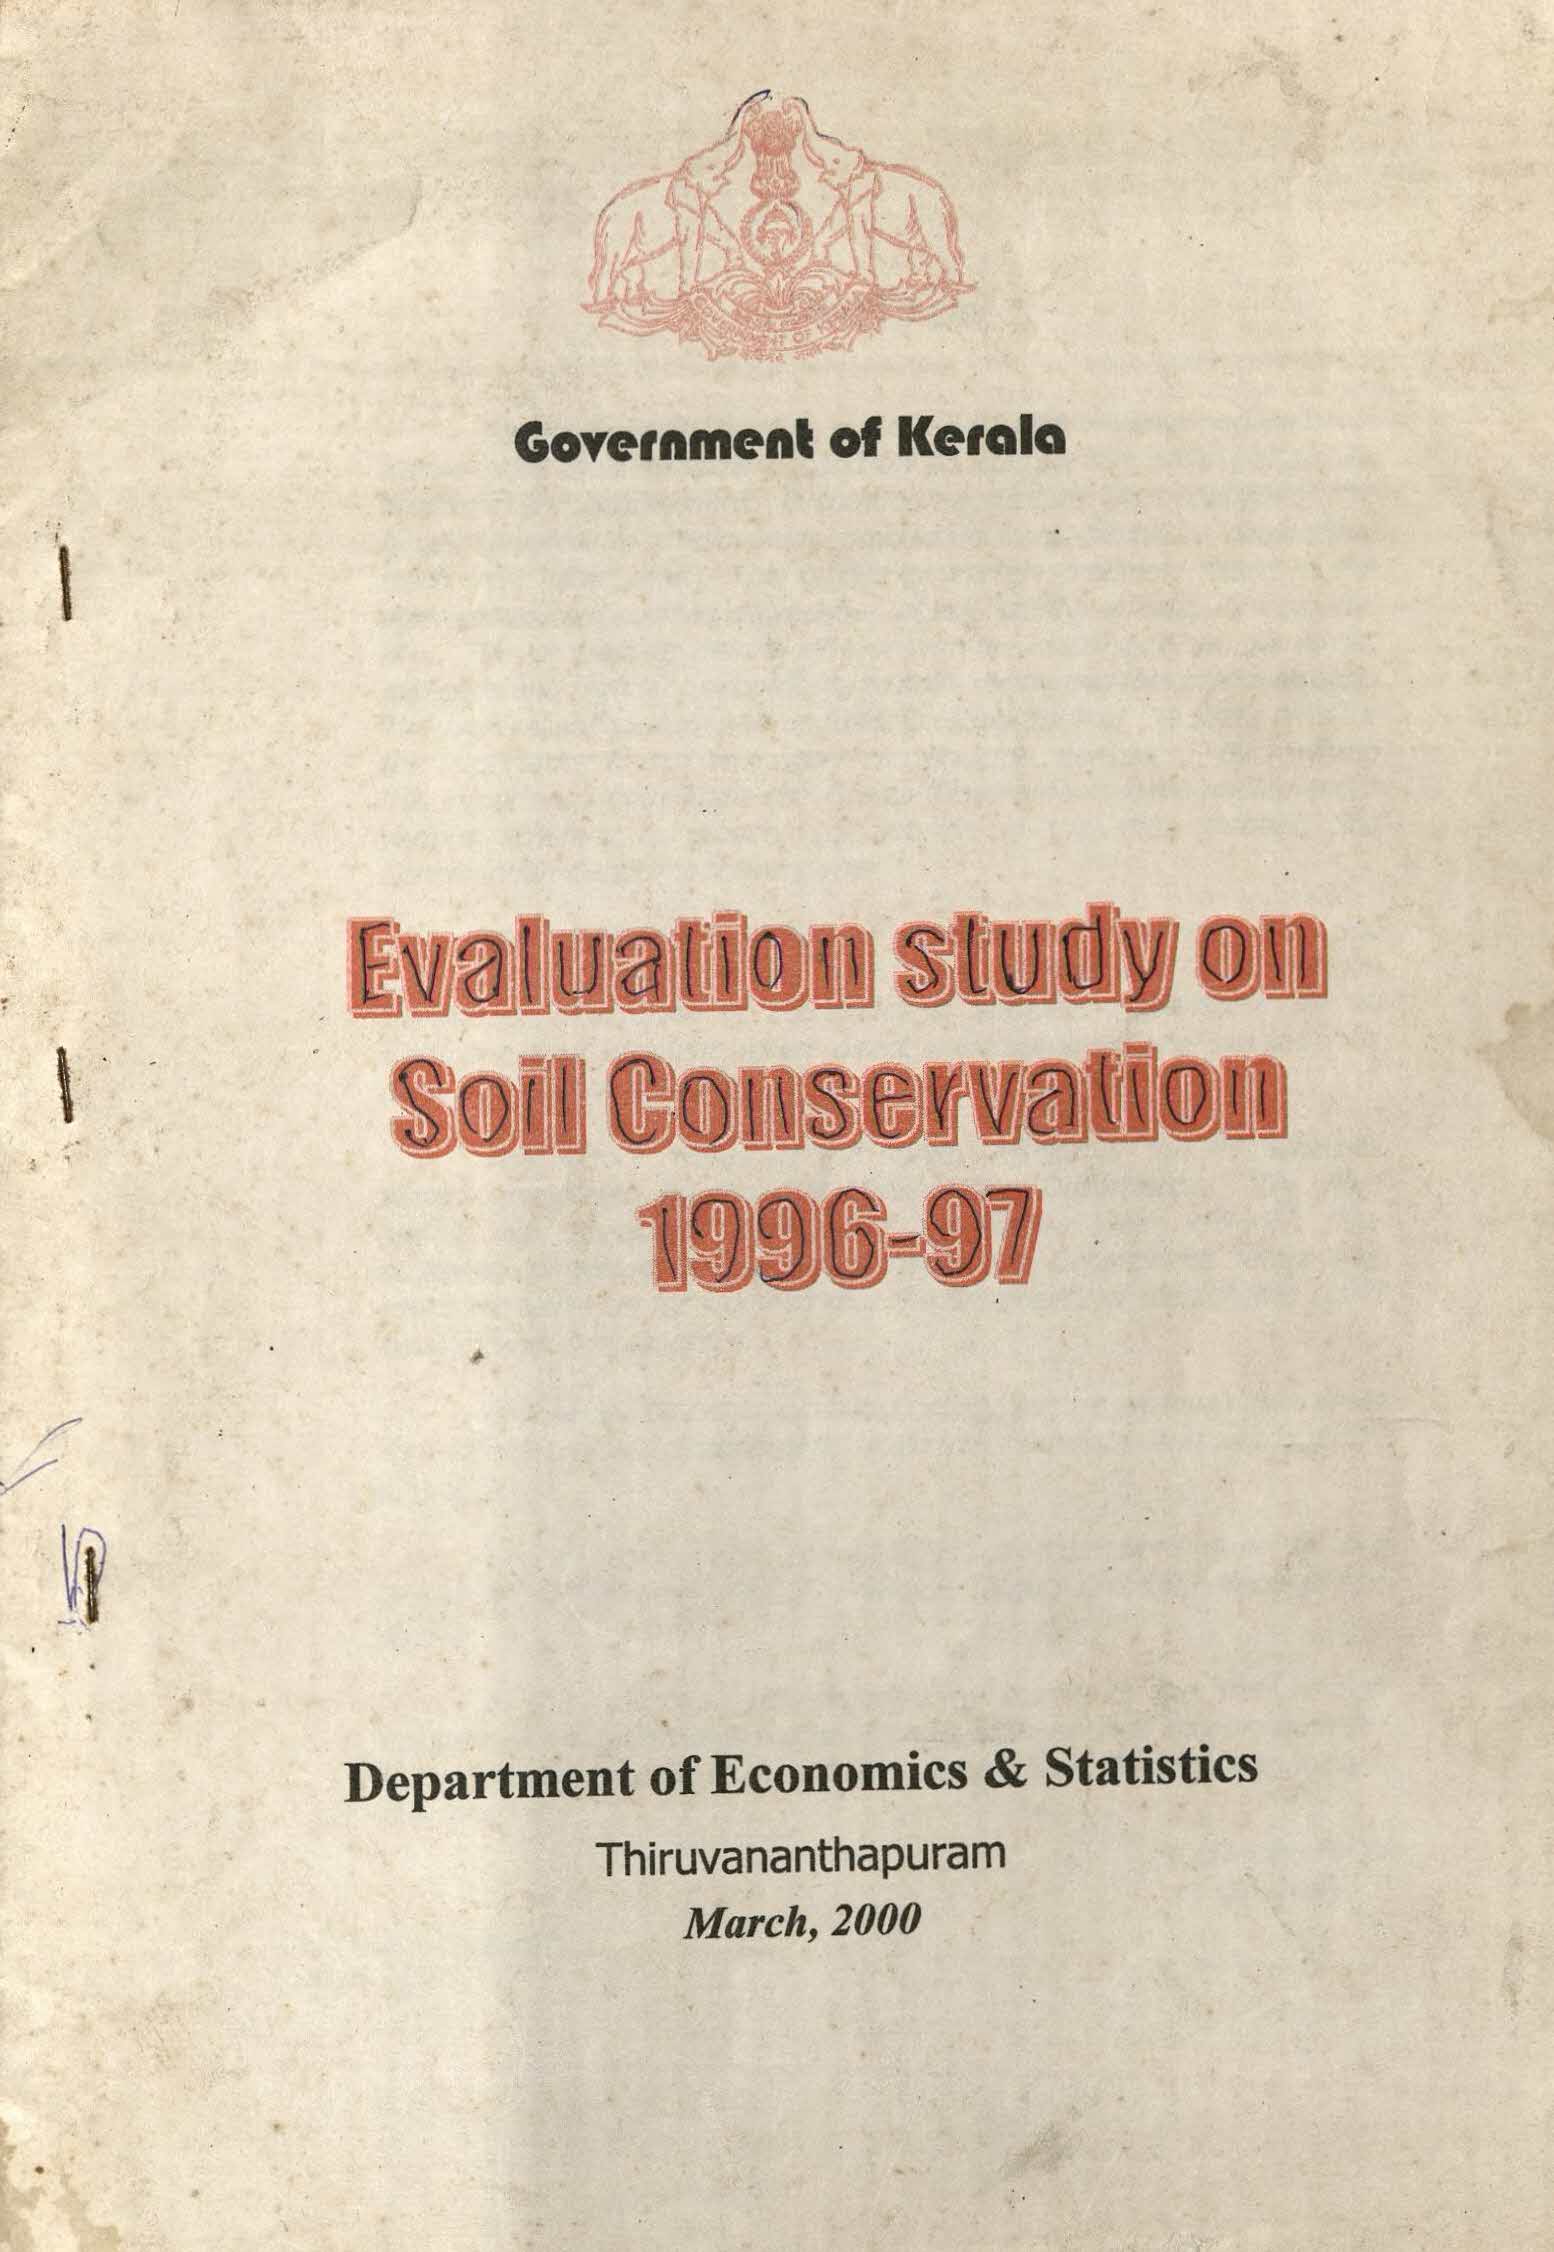 EVALUATION STUDY ON SOIL CONSERVATION  IN KERALA 1996-97